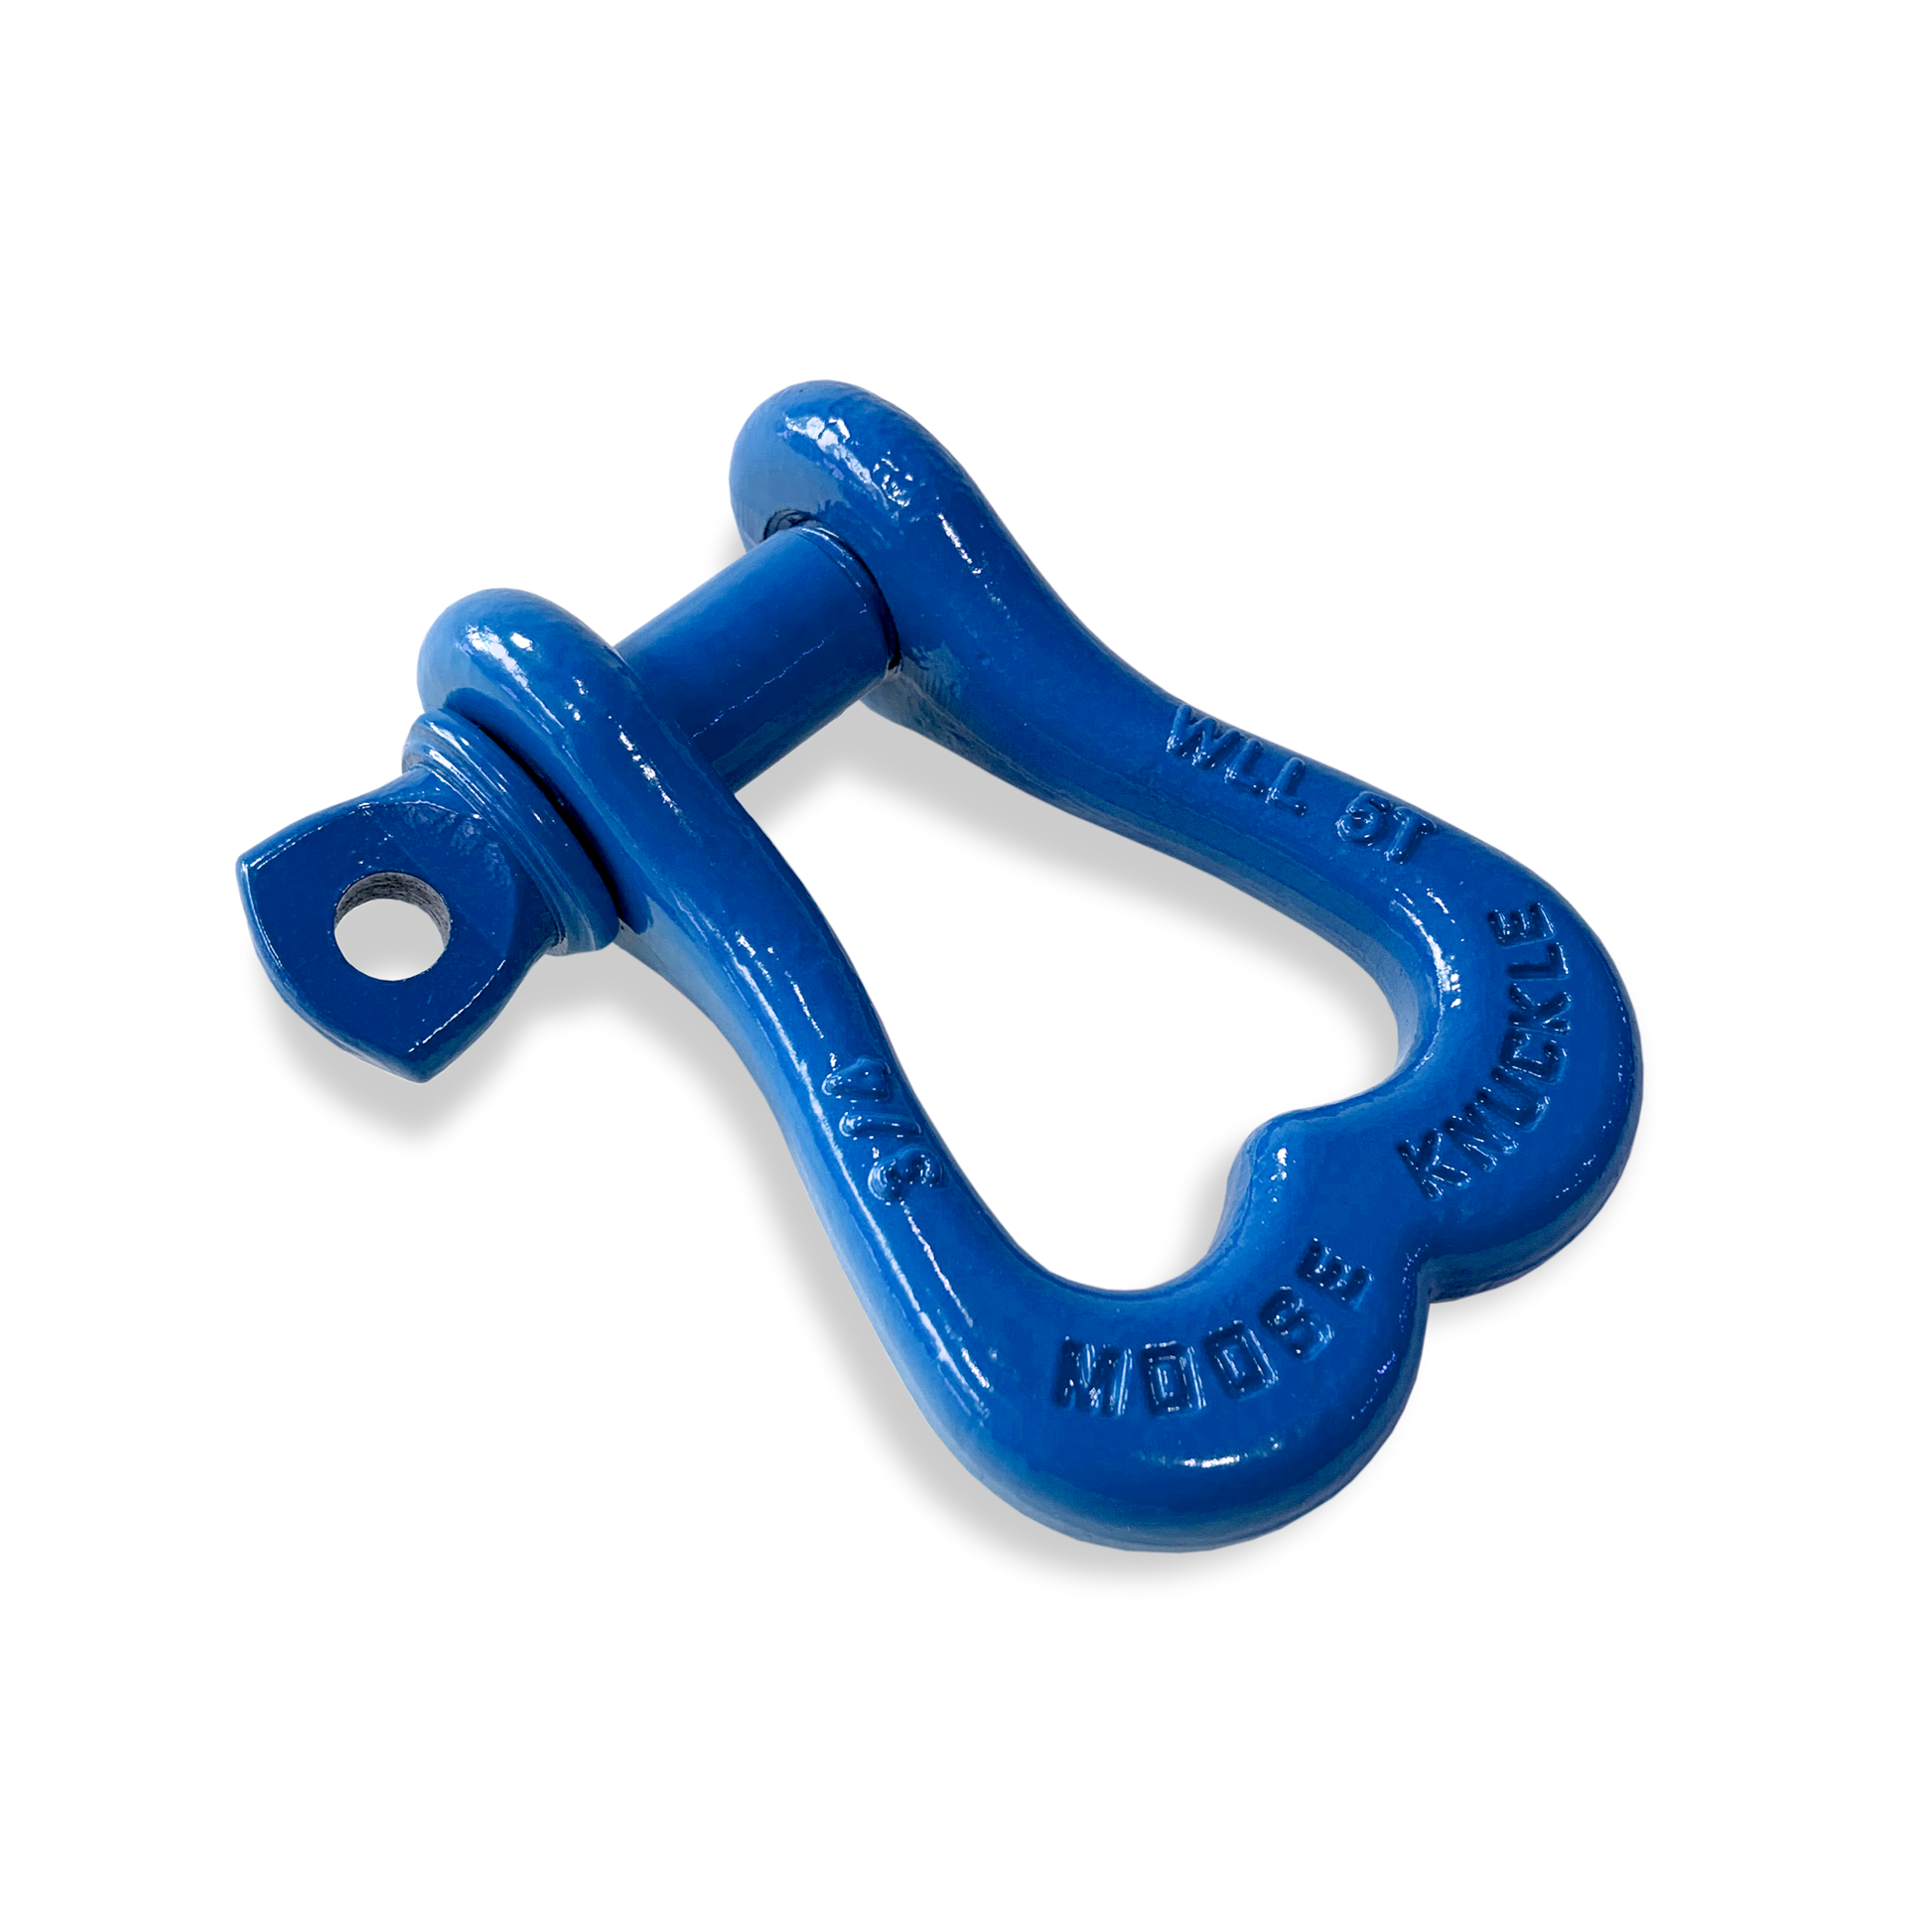 Moose Knuckle XL Blue Balls Bow D-Ring 3/4" Shackle for Off-Road Closed Loop 4x4 and SxS Vehicle Recovery